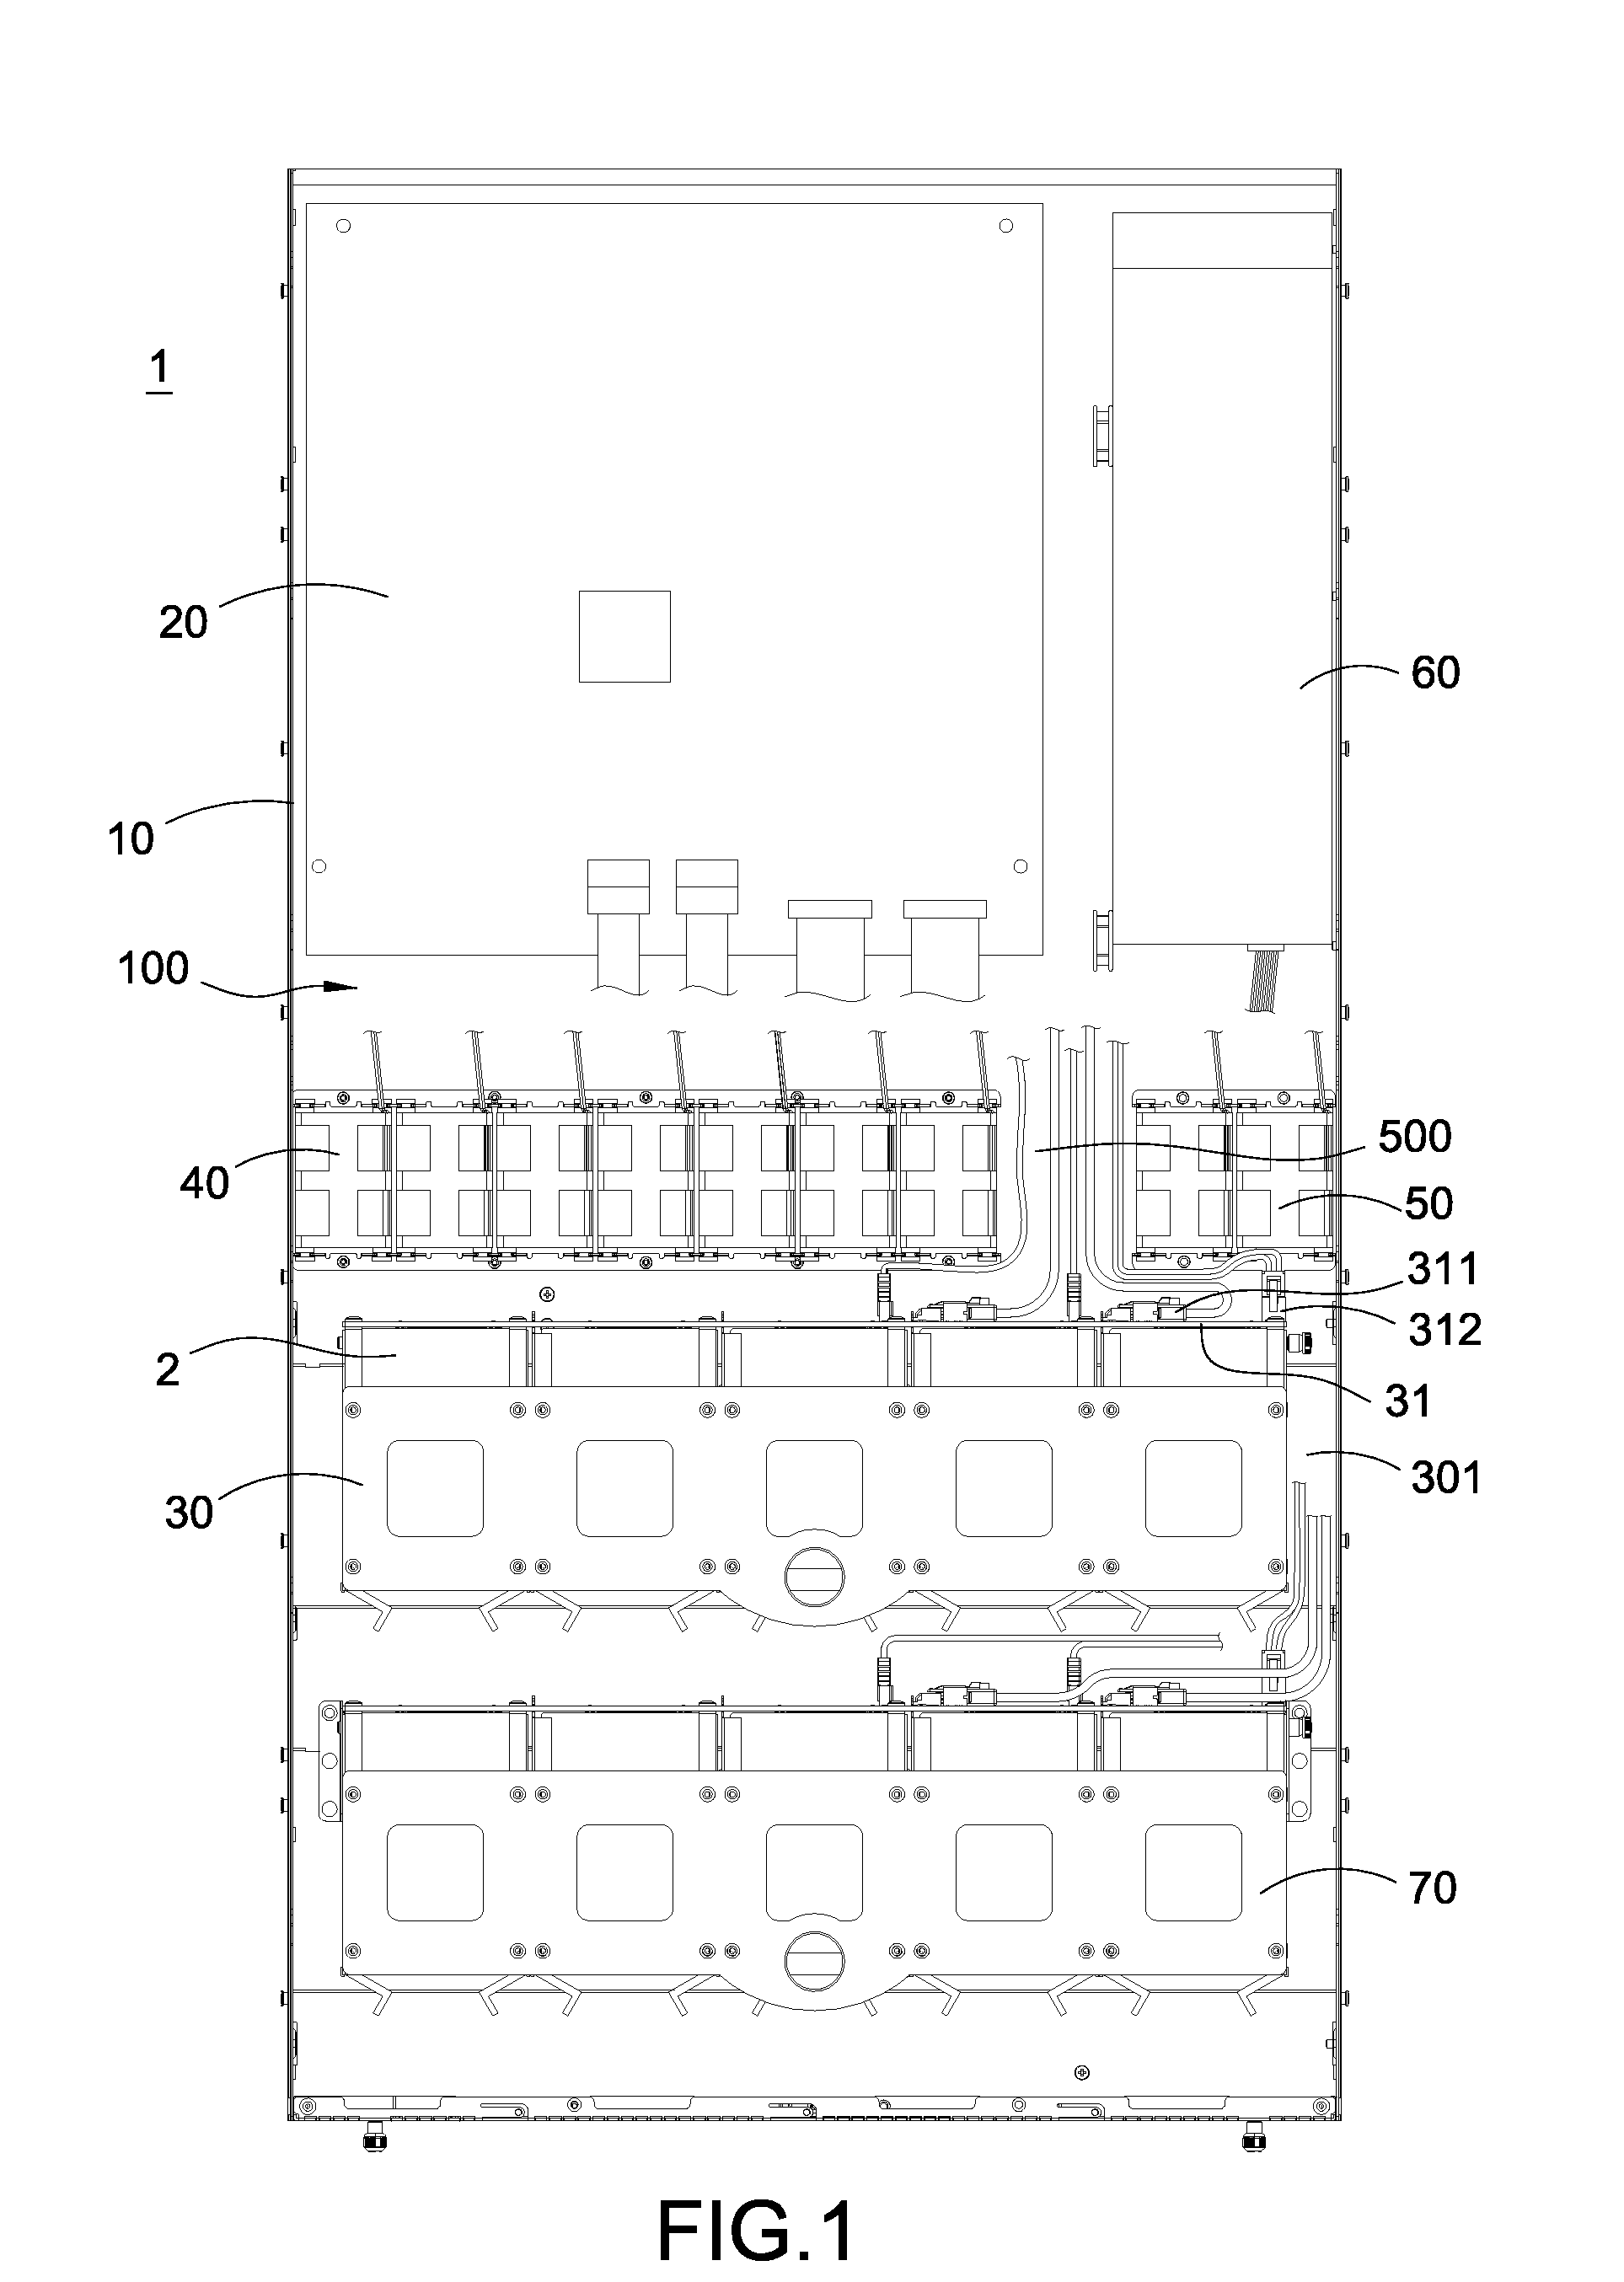 Server chassis capable of accessing and rotating storage devices accommodated therein